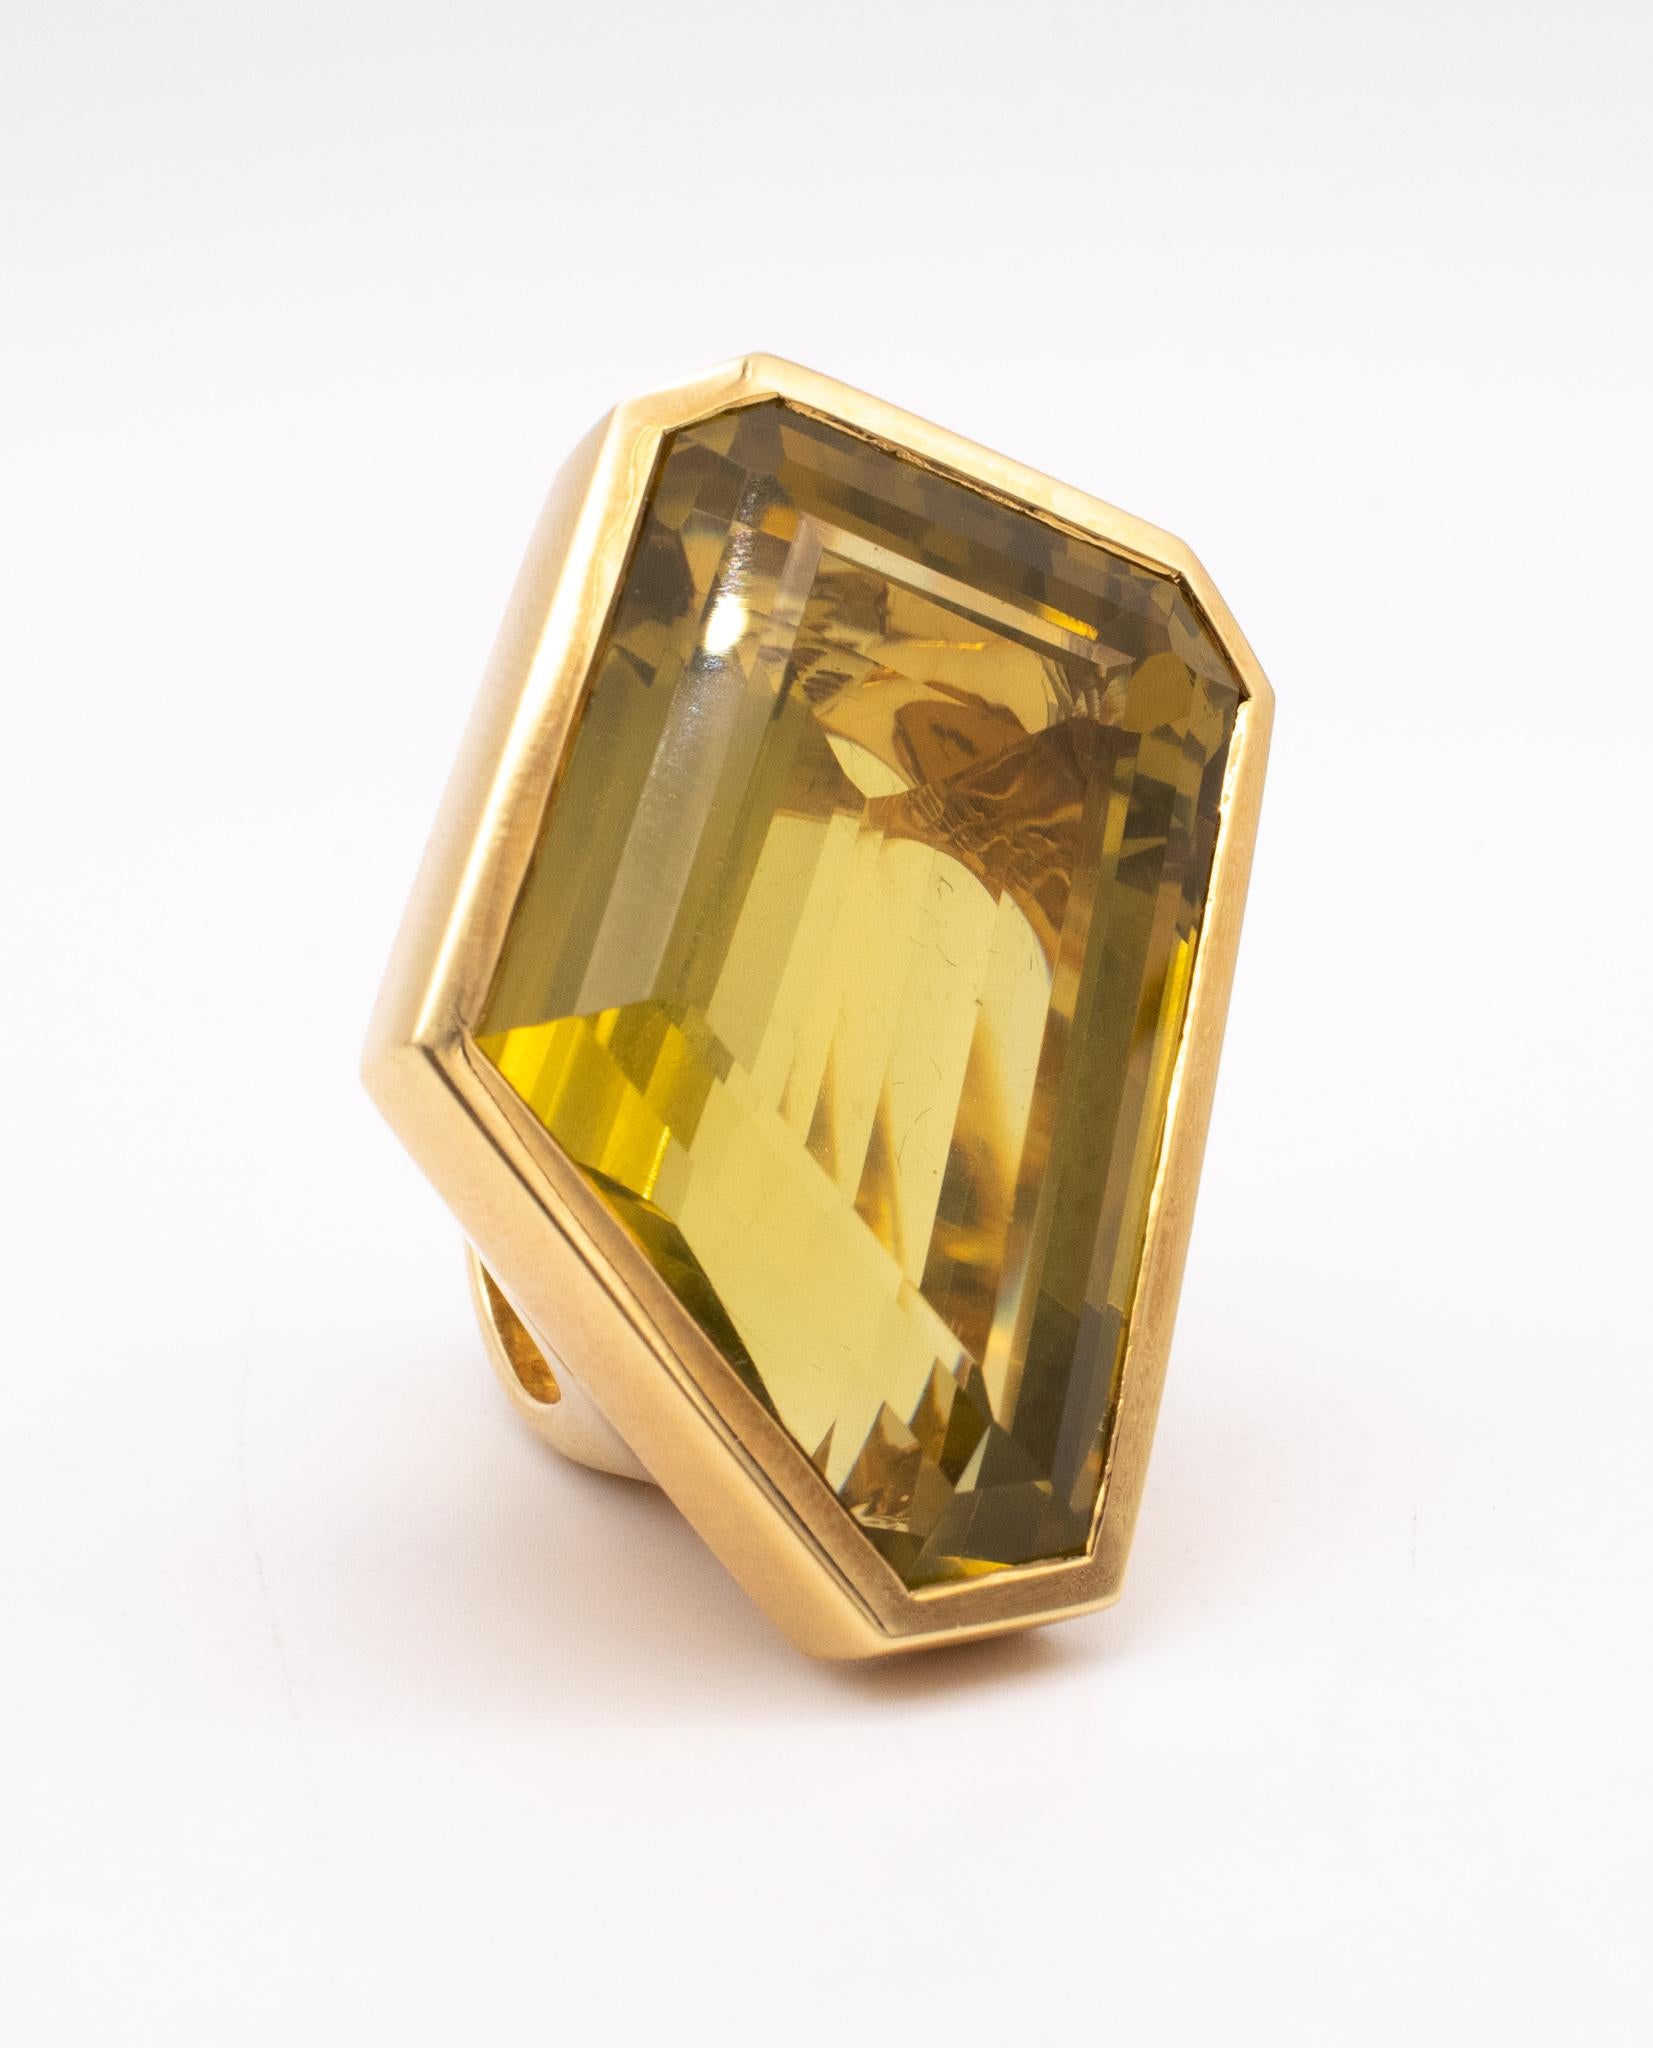 Tony Duquette Massive Geometric Cocktail Ring 18 Karat Yellow Gold 85cts Citrine For Sale 5